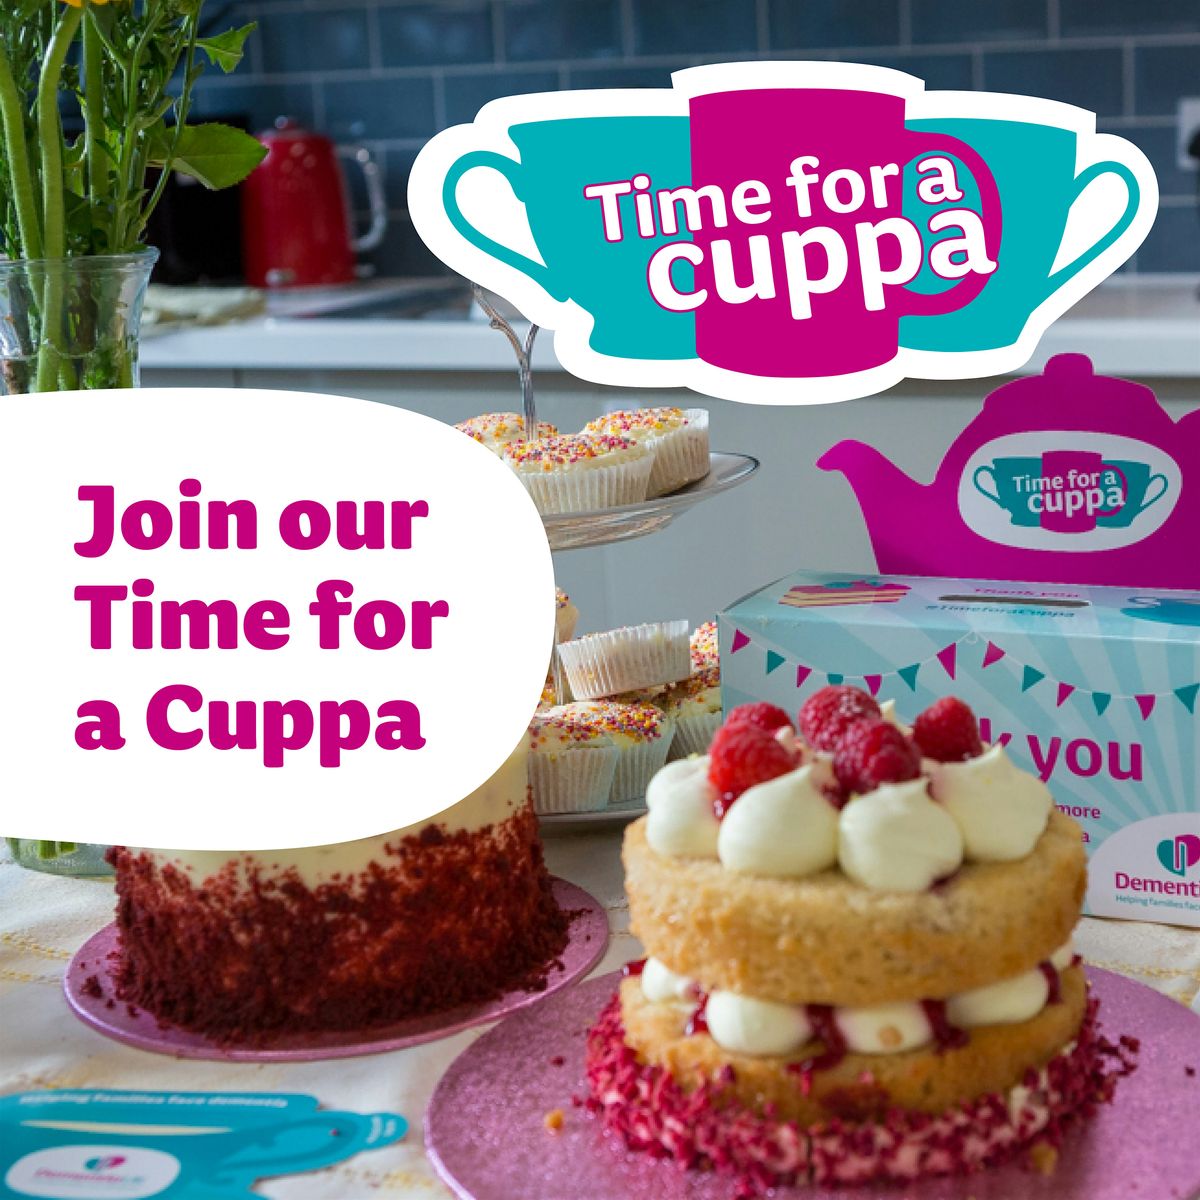 Time for a cuppa fundraiser